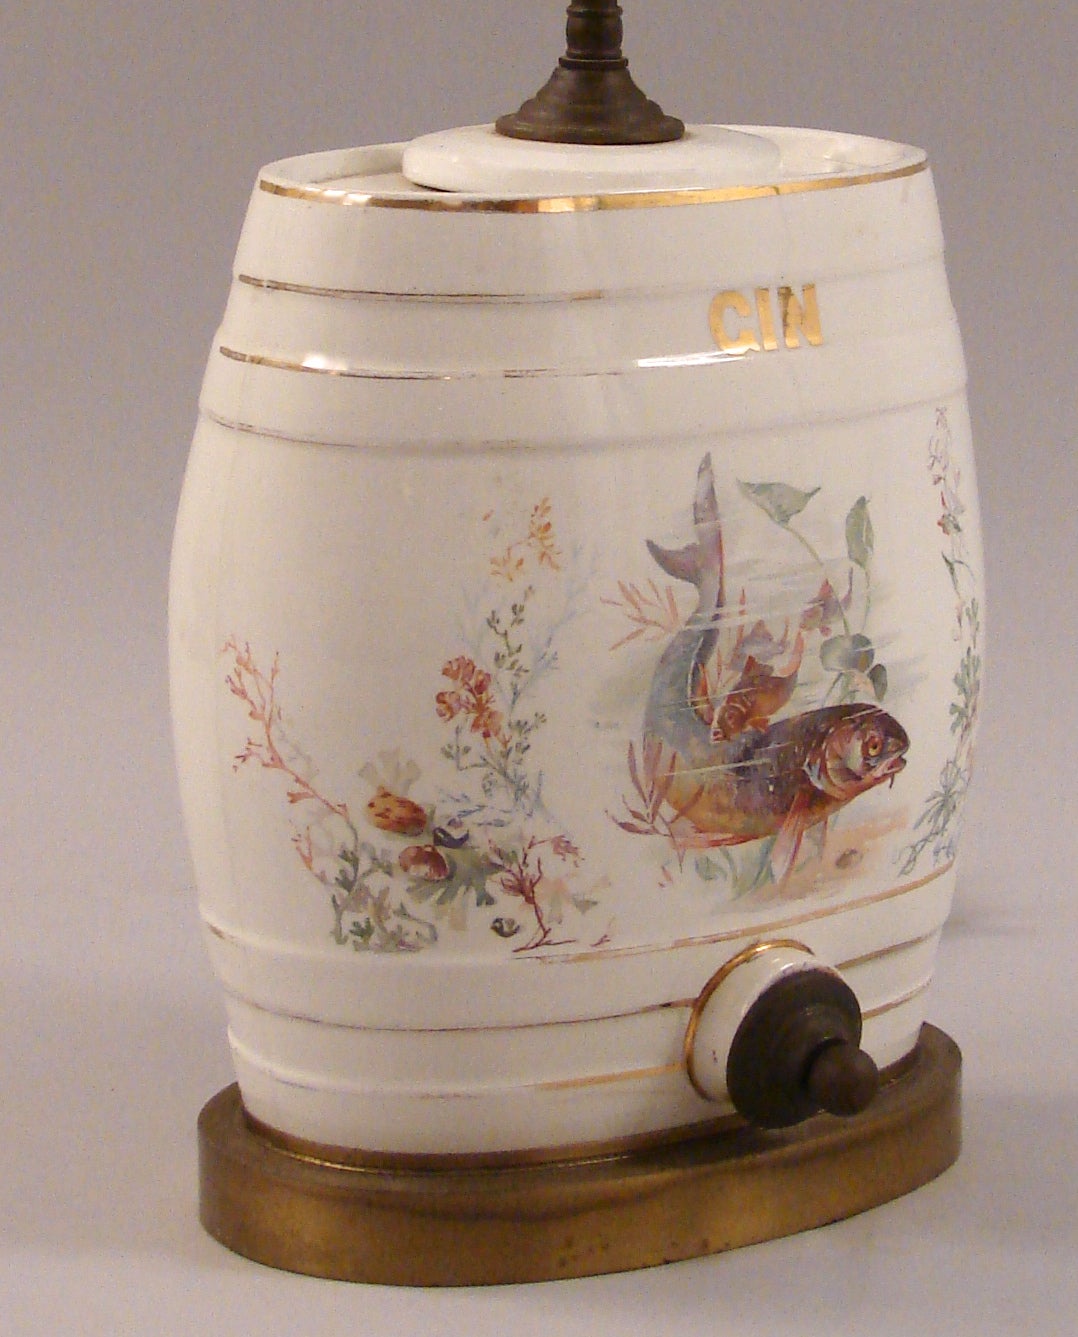 An English 19th century porcelain gin barrel depicting a lively trout in an underwater floral setting, now mounted as a lamp, circa 1875.